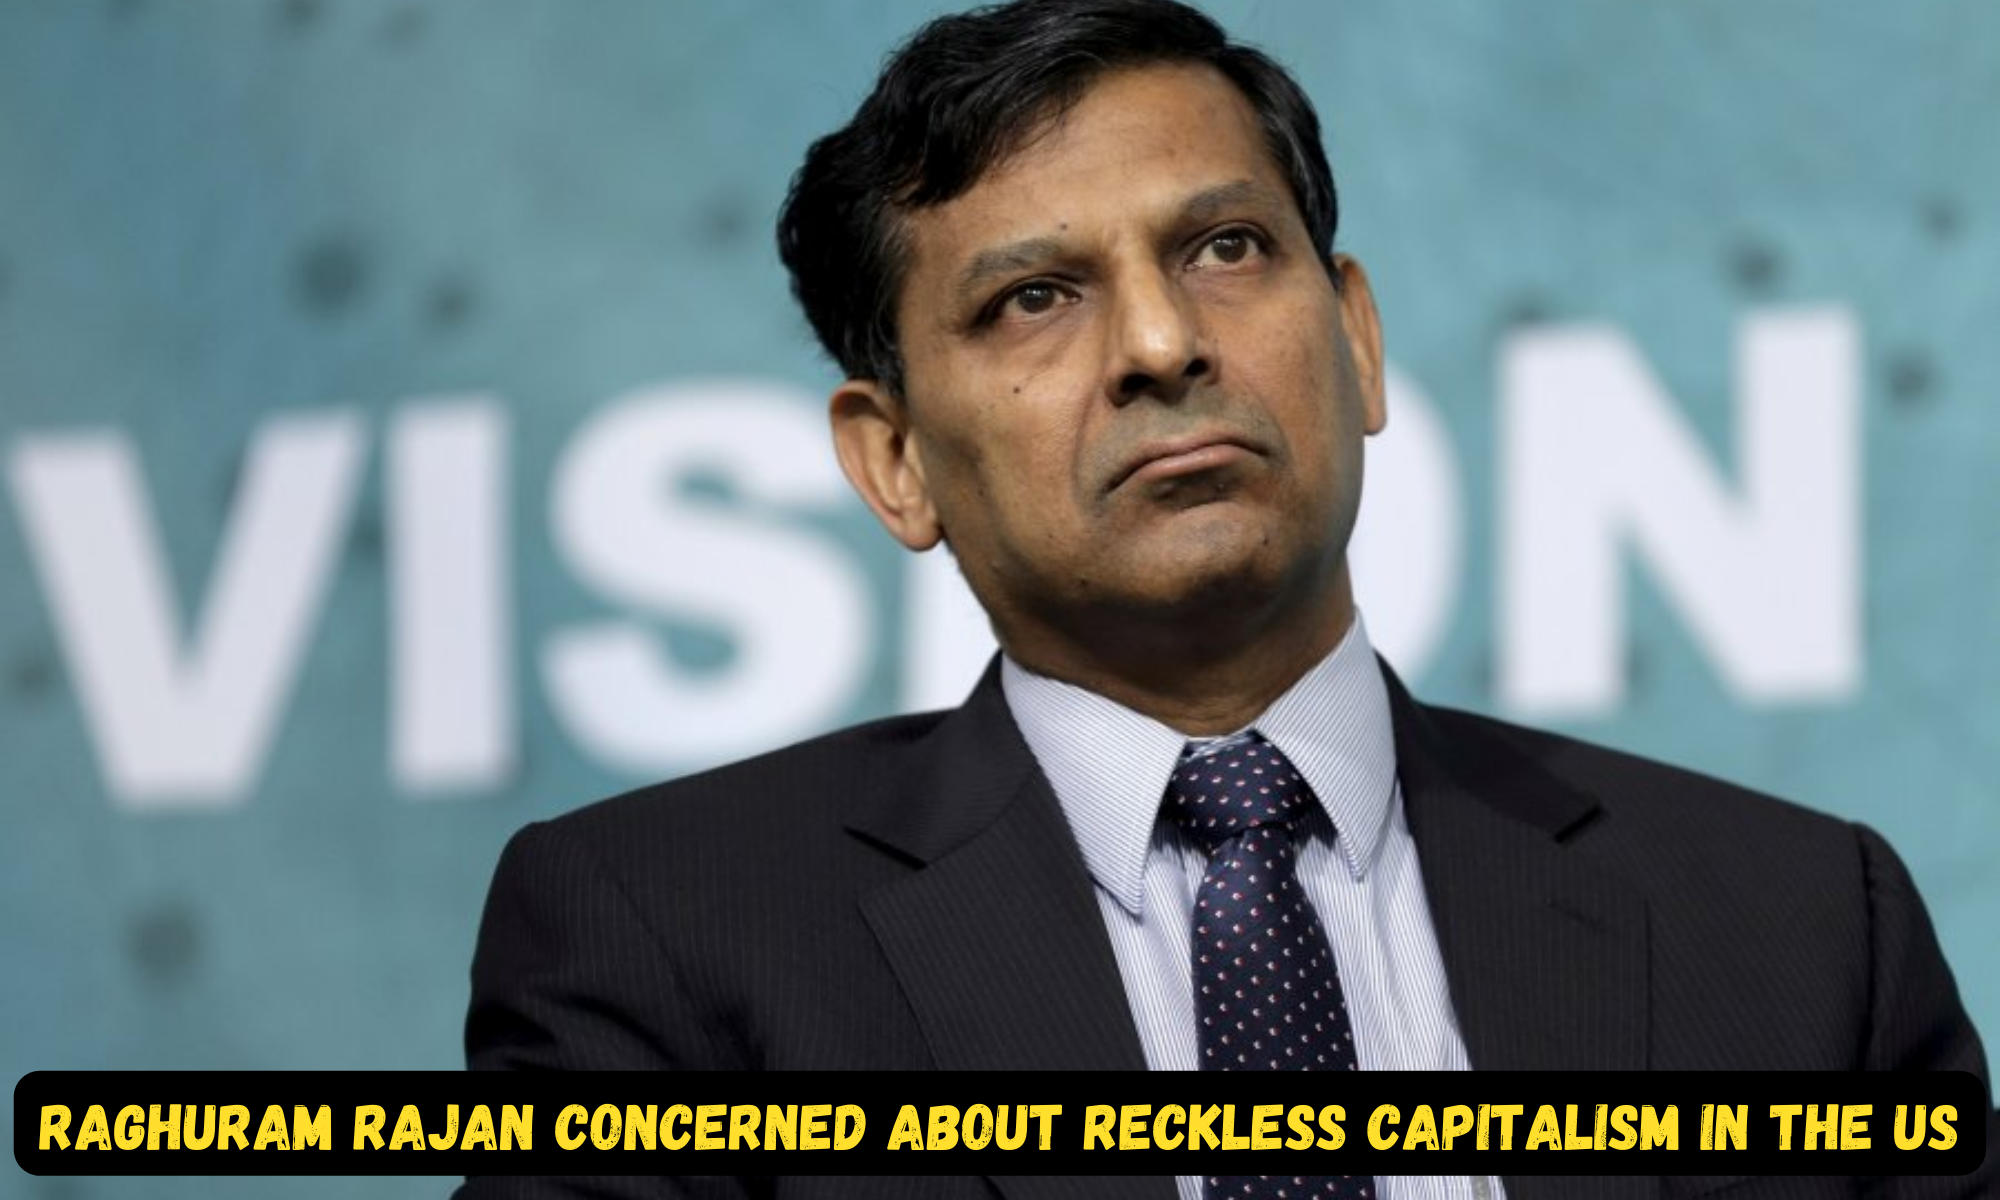 Raghuram Rajan concerned about reckless capitalism in the US